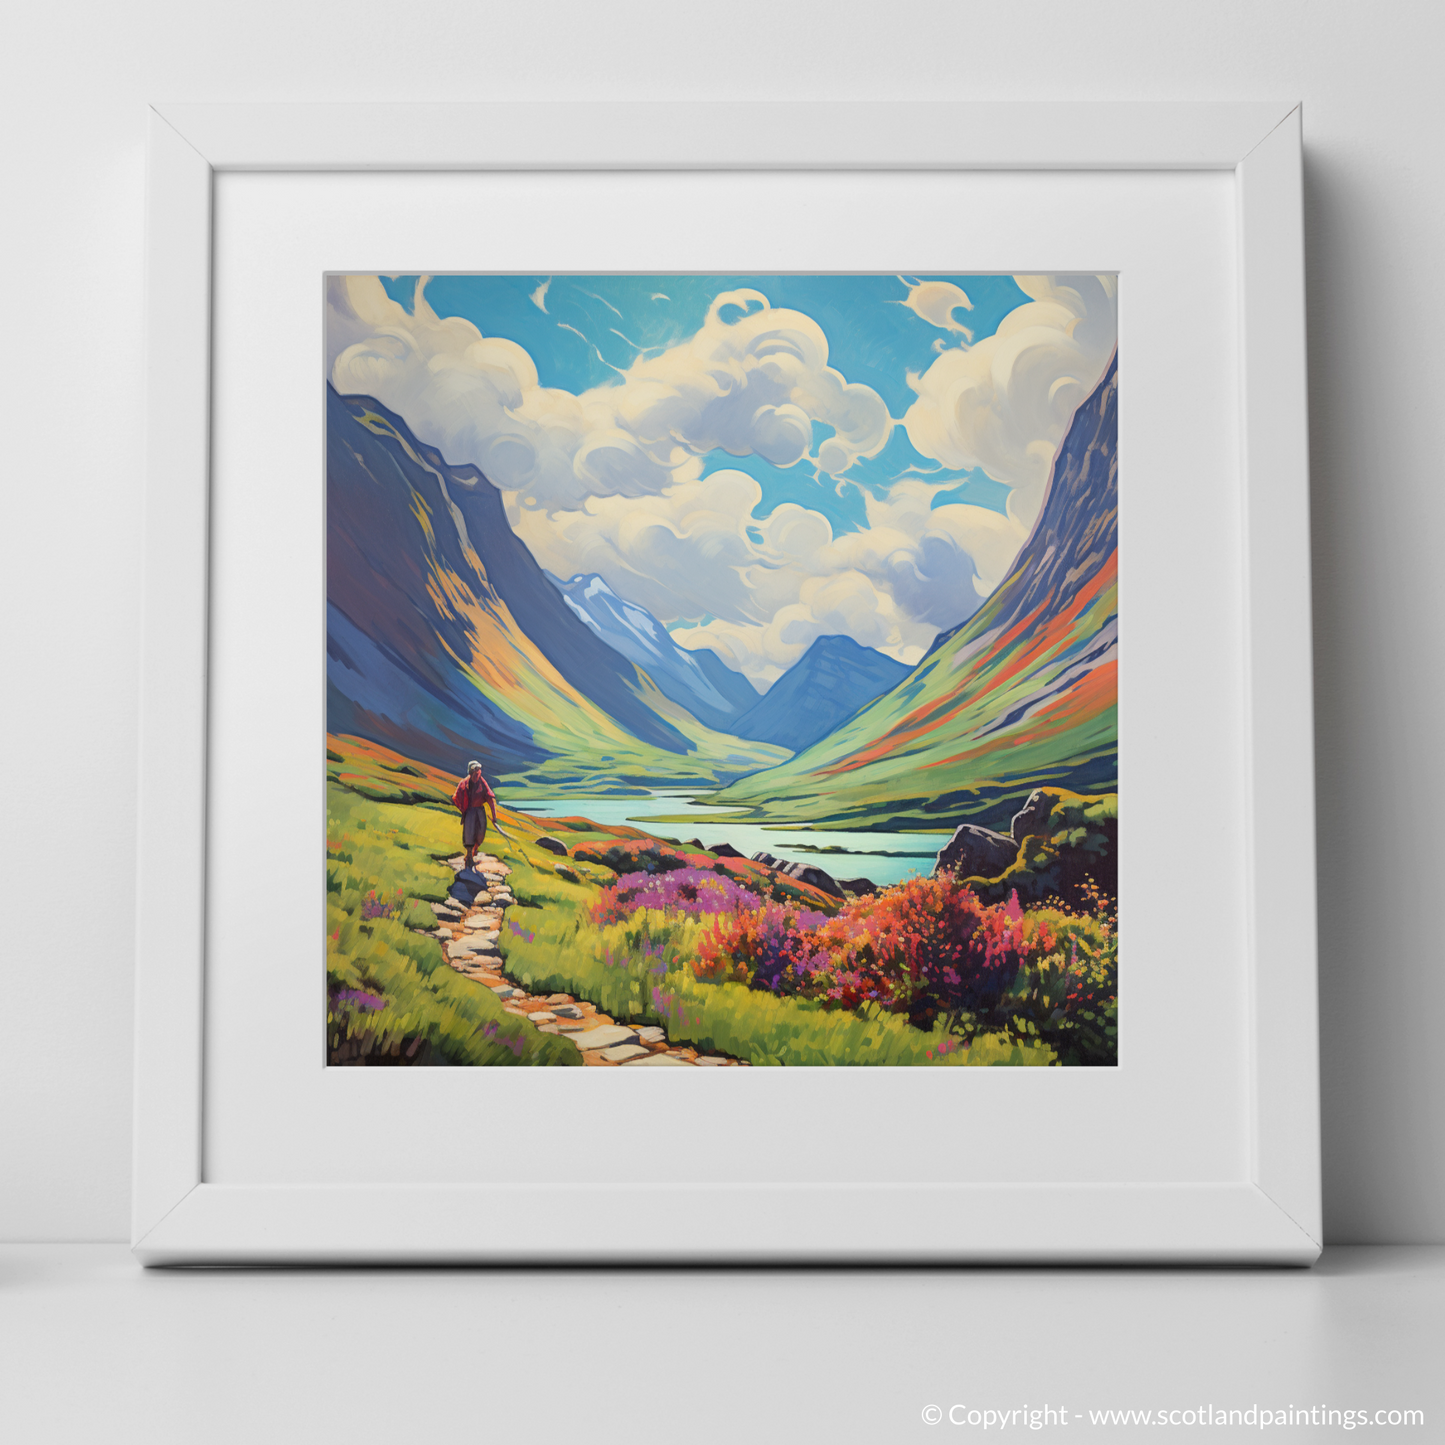 Art Print of Lone hiker in Glencoe during summer with a white frame